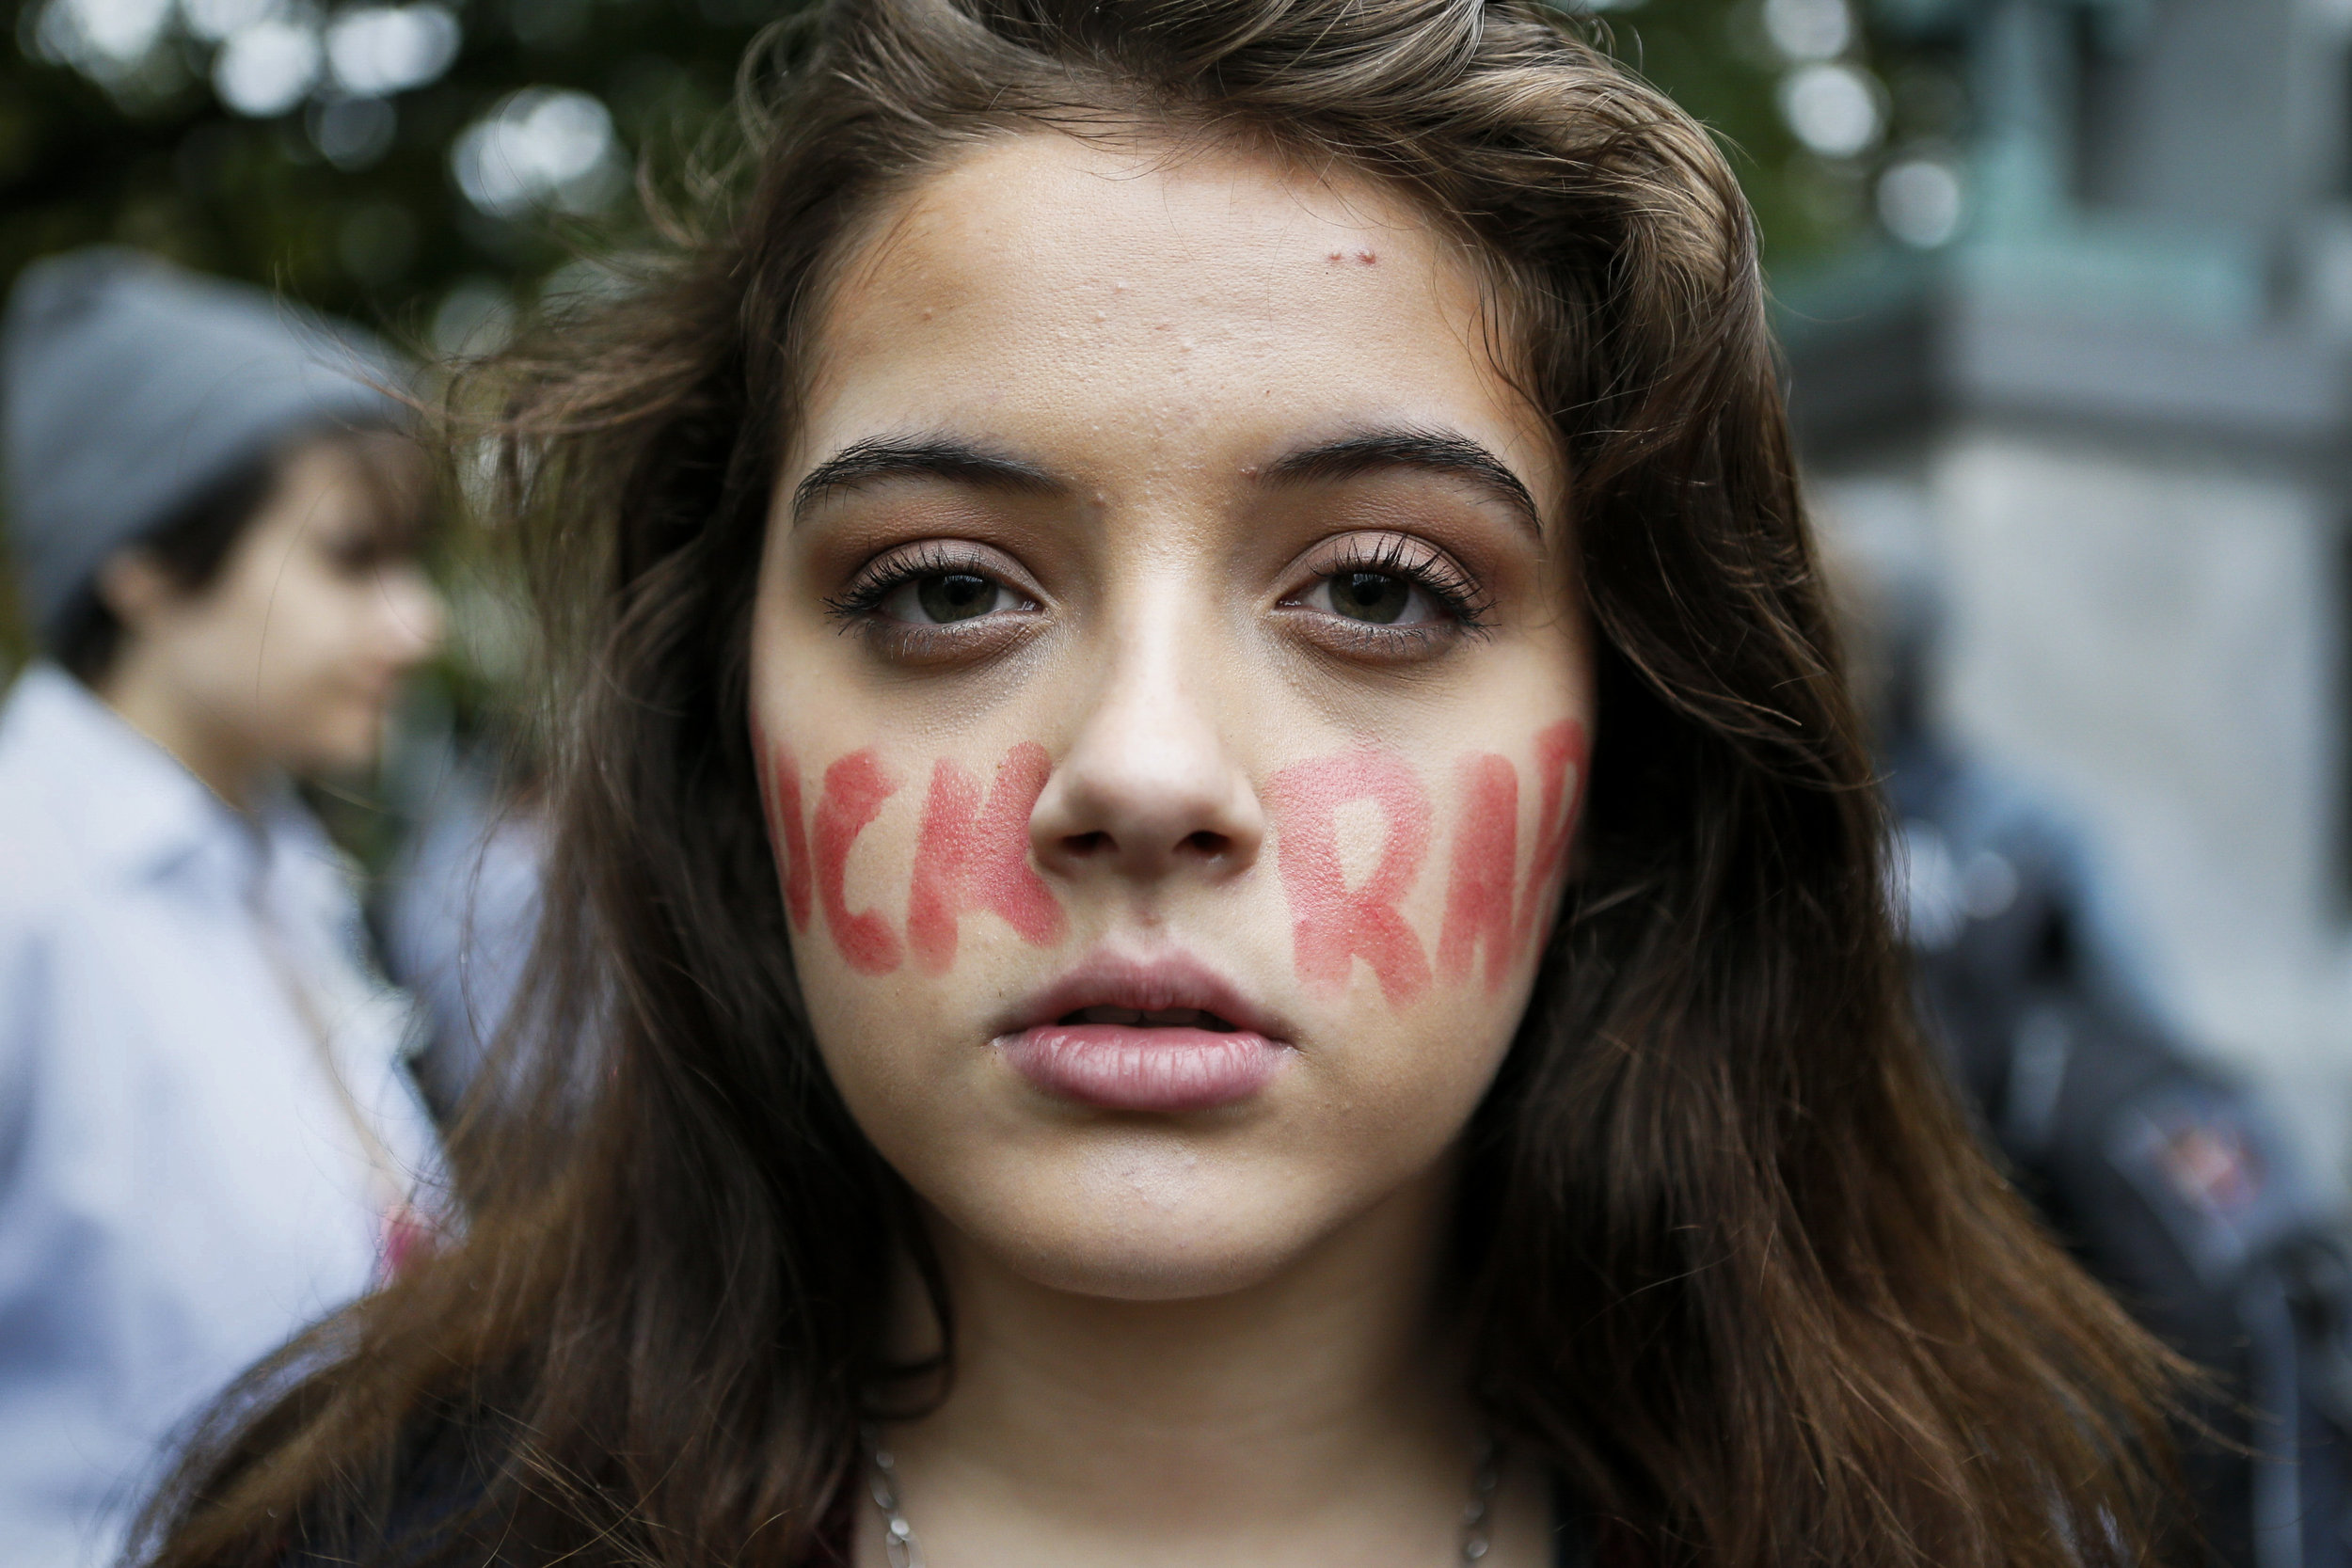  Carly Preston, a freshman studying political science and journalism, displays her facepaint after the FuckRapeCulture march on Friday, Oct. 10, 2014. FuckRapeCulture is a campus organization that seeks to raise awareness about rape culture at Ohio U